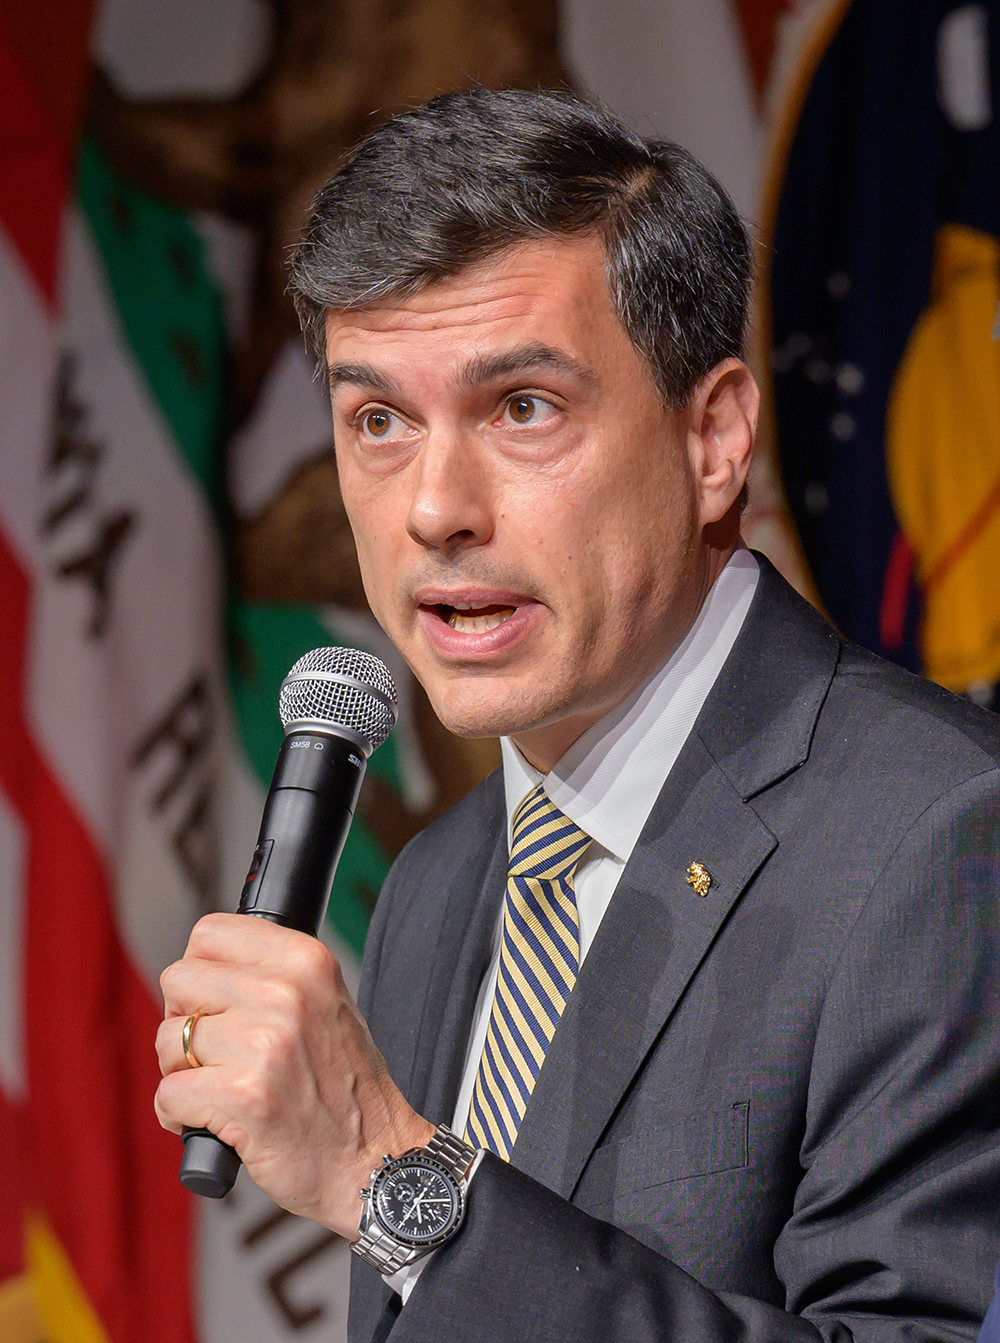 A white man in a suit holds a mic with the California flag in the background